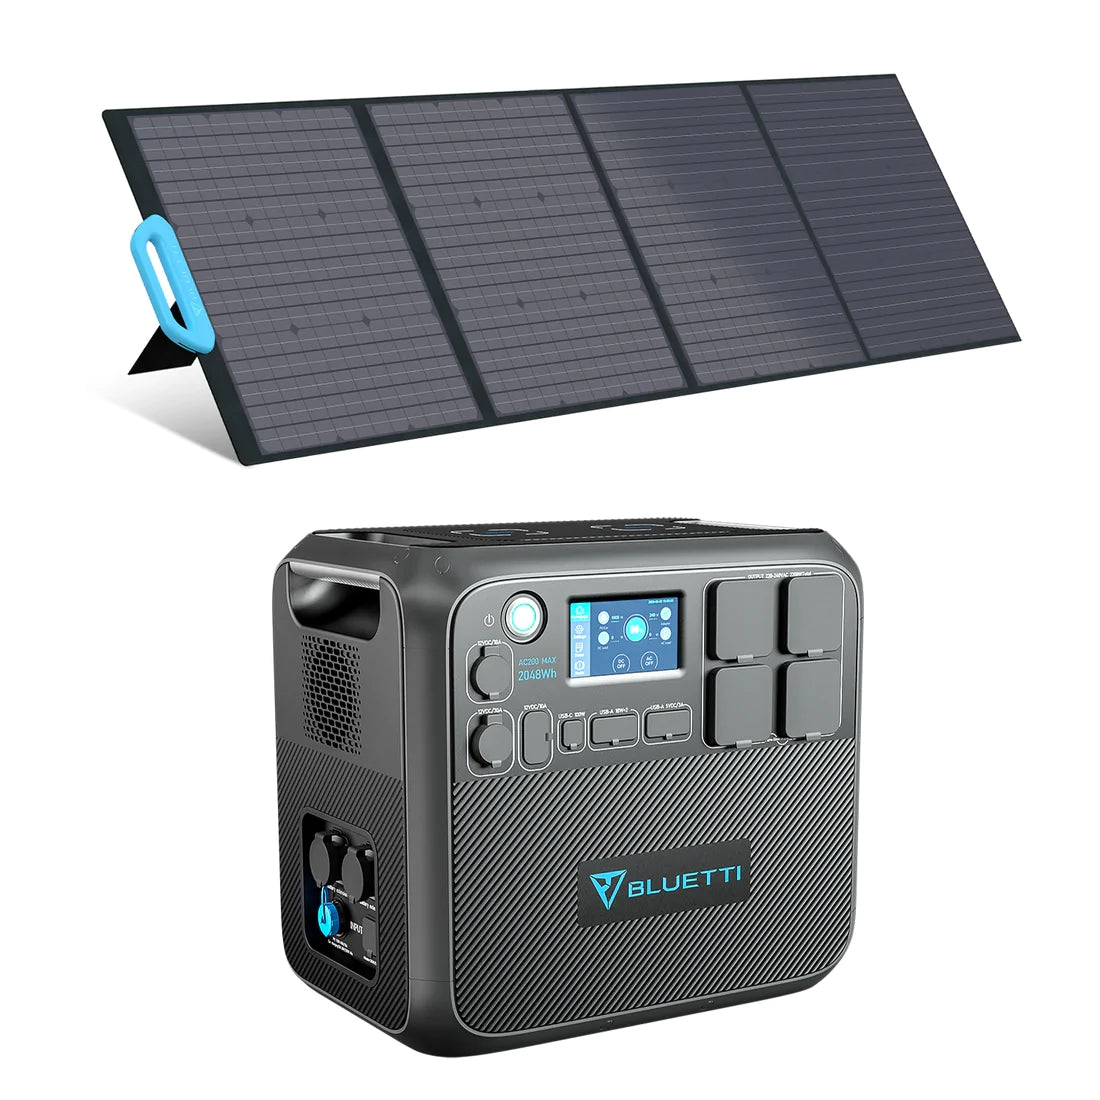 New power station from BLUETTI with 268Wh LiFePO4 battery - 9to5Toys